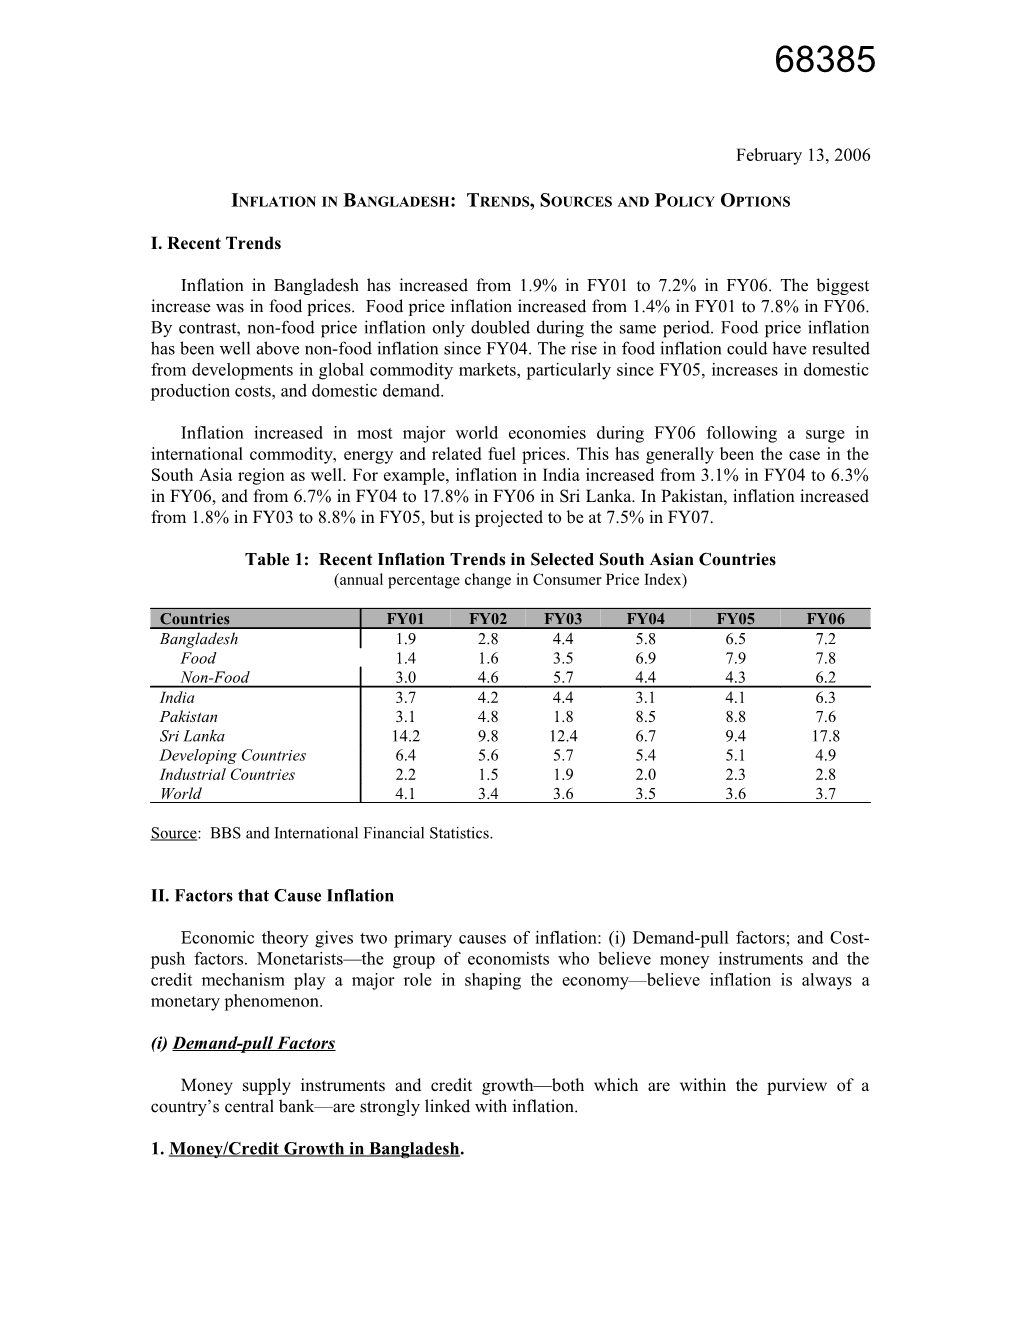 Bangladesh: Inflation Trends, Sources and Policy